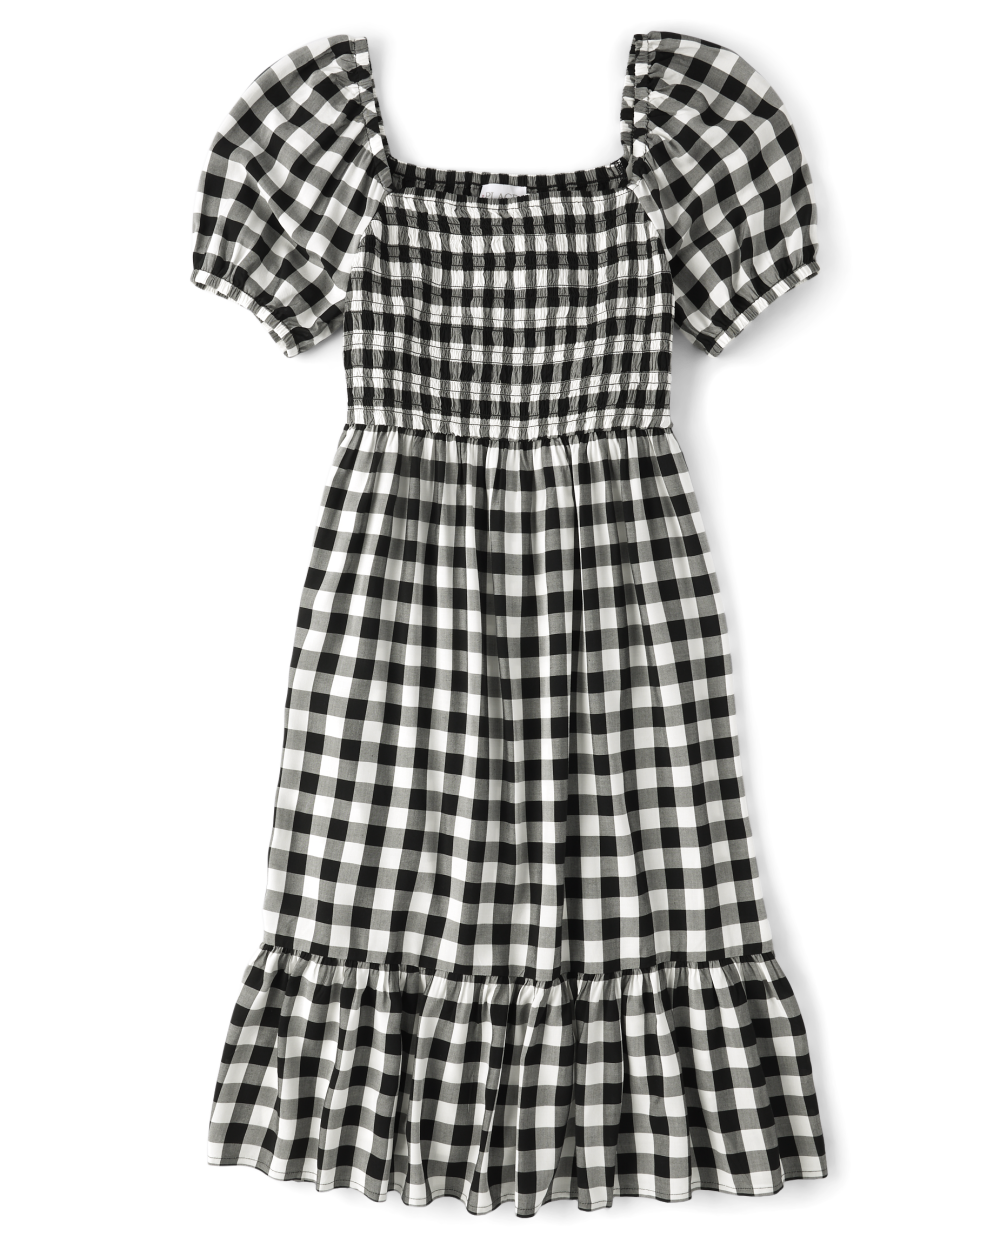 Rayon Checkered Gingham Print Puff Sleeves Short Sleeves Sleeves Smocked Square Neck Above the Knee Dress With Ruffles